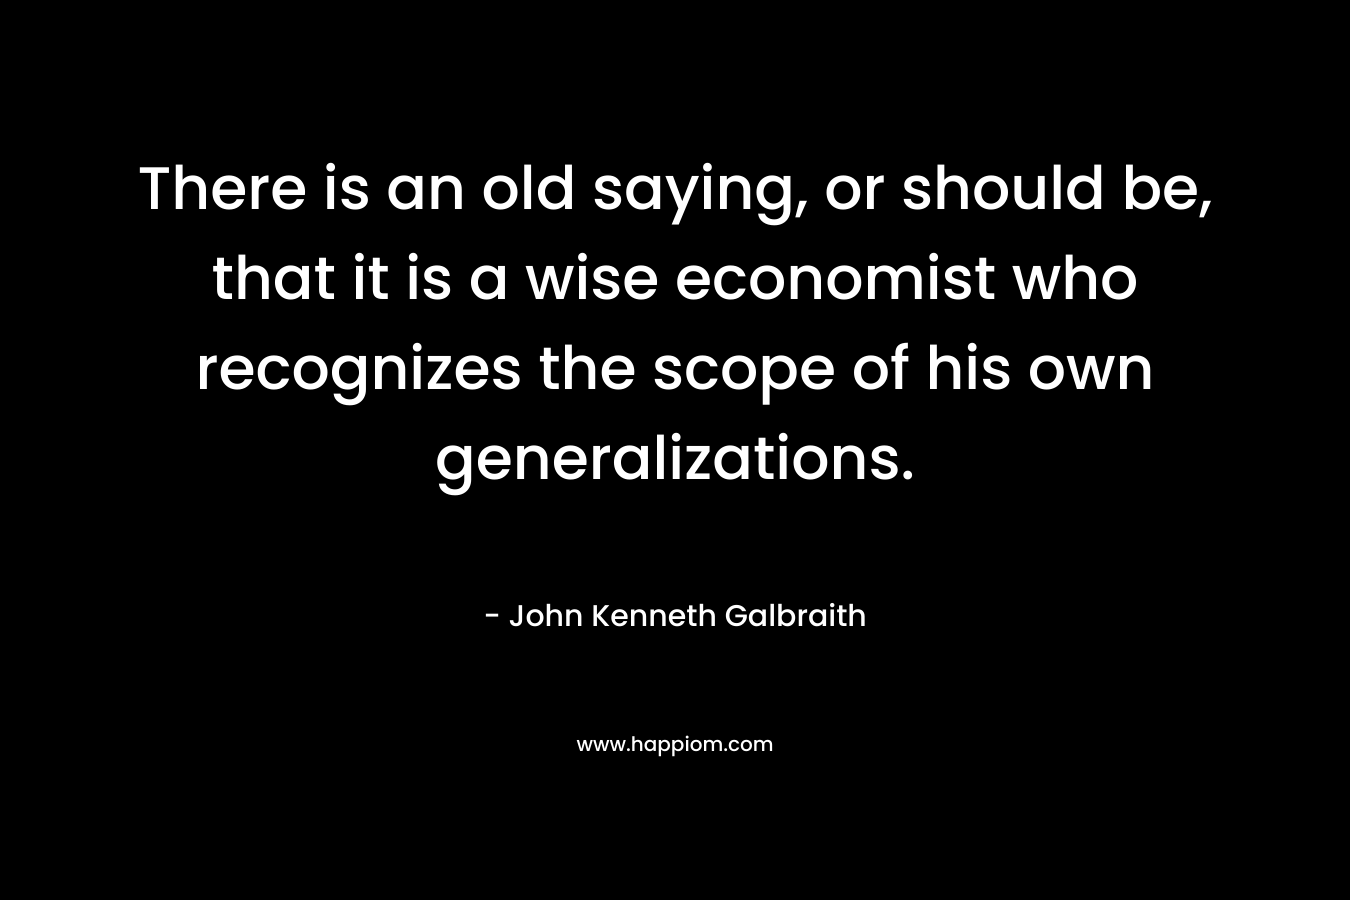 There is an old saying, or should be, that it is a wise economist who recognizes the scope of his own generalizations.